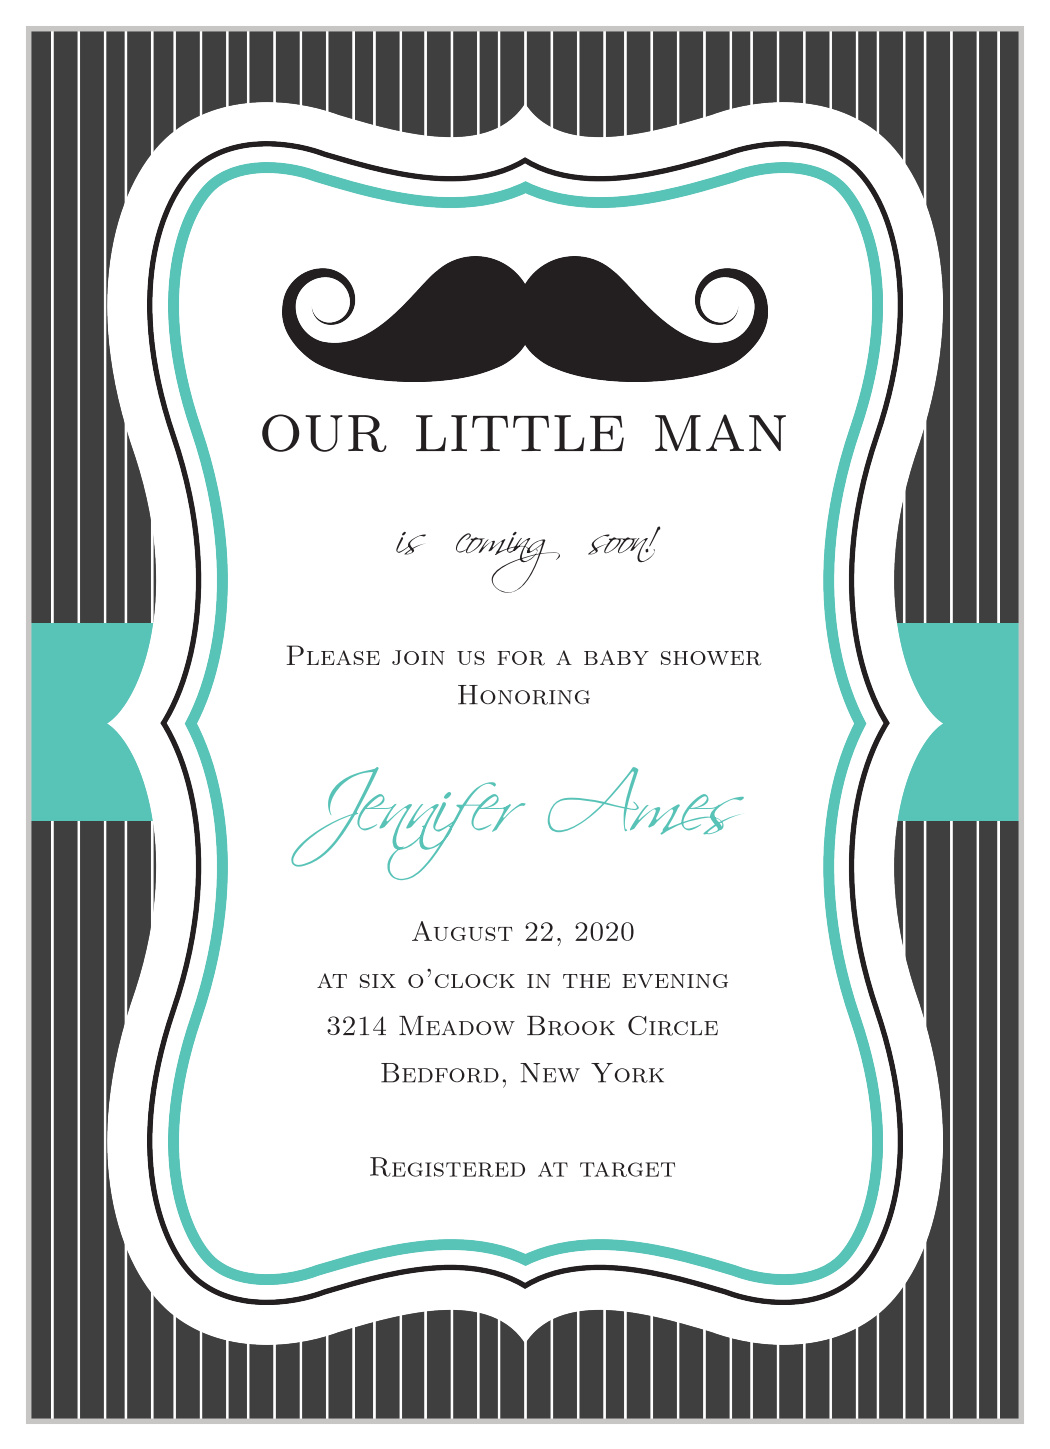 Little Man Baby Shower Invitations by Basic Invite